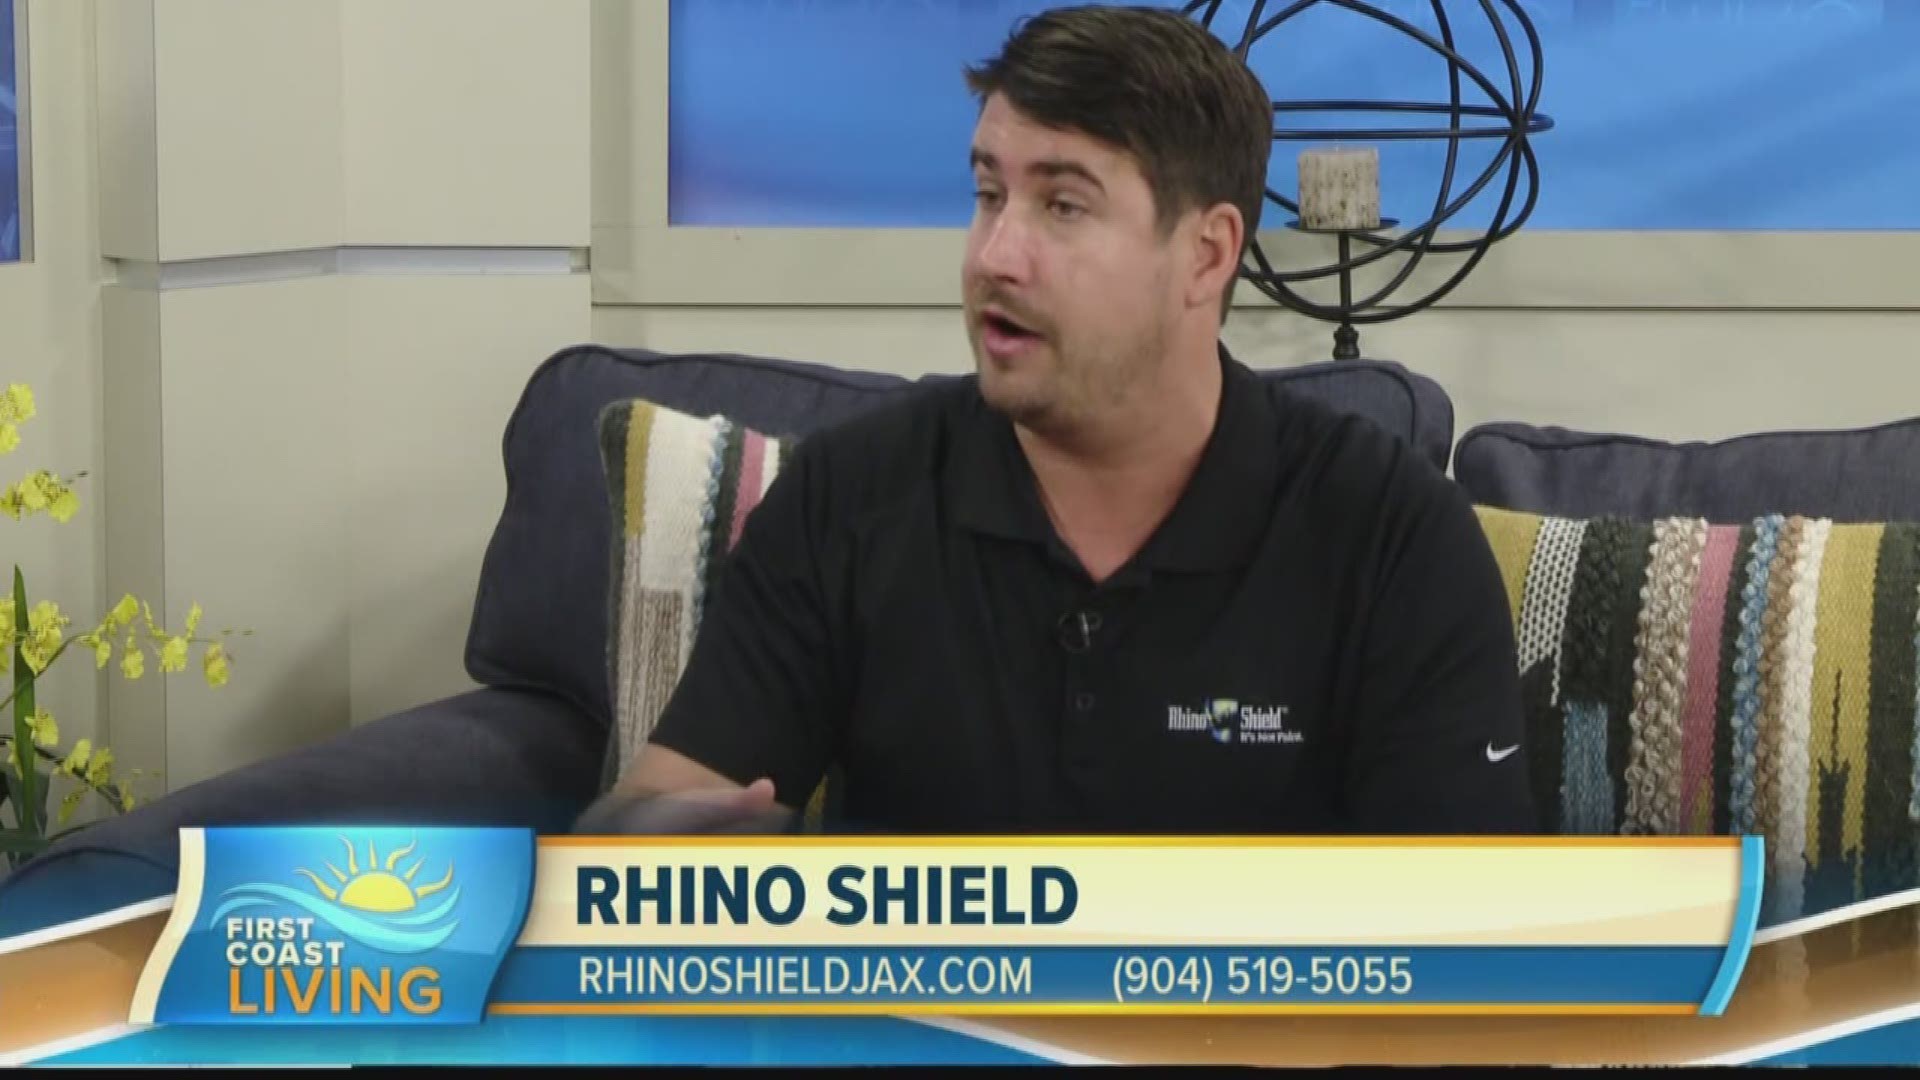 Get your roof and the rest of the house ready for family visits this season with Rhino Shield!